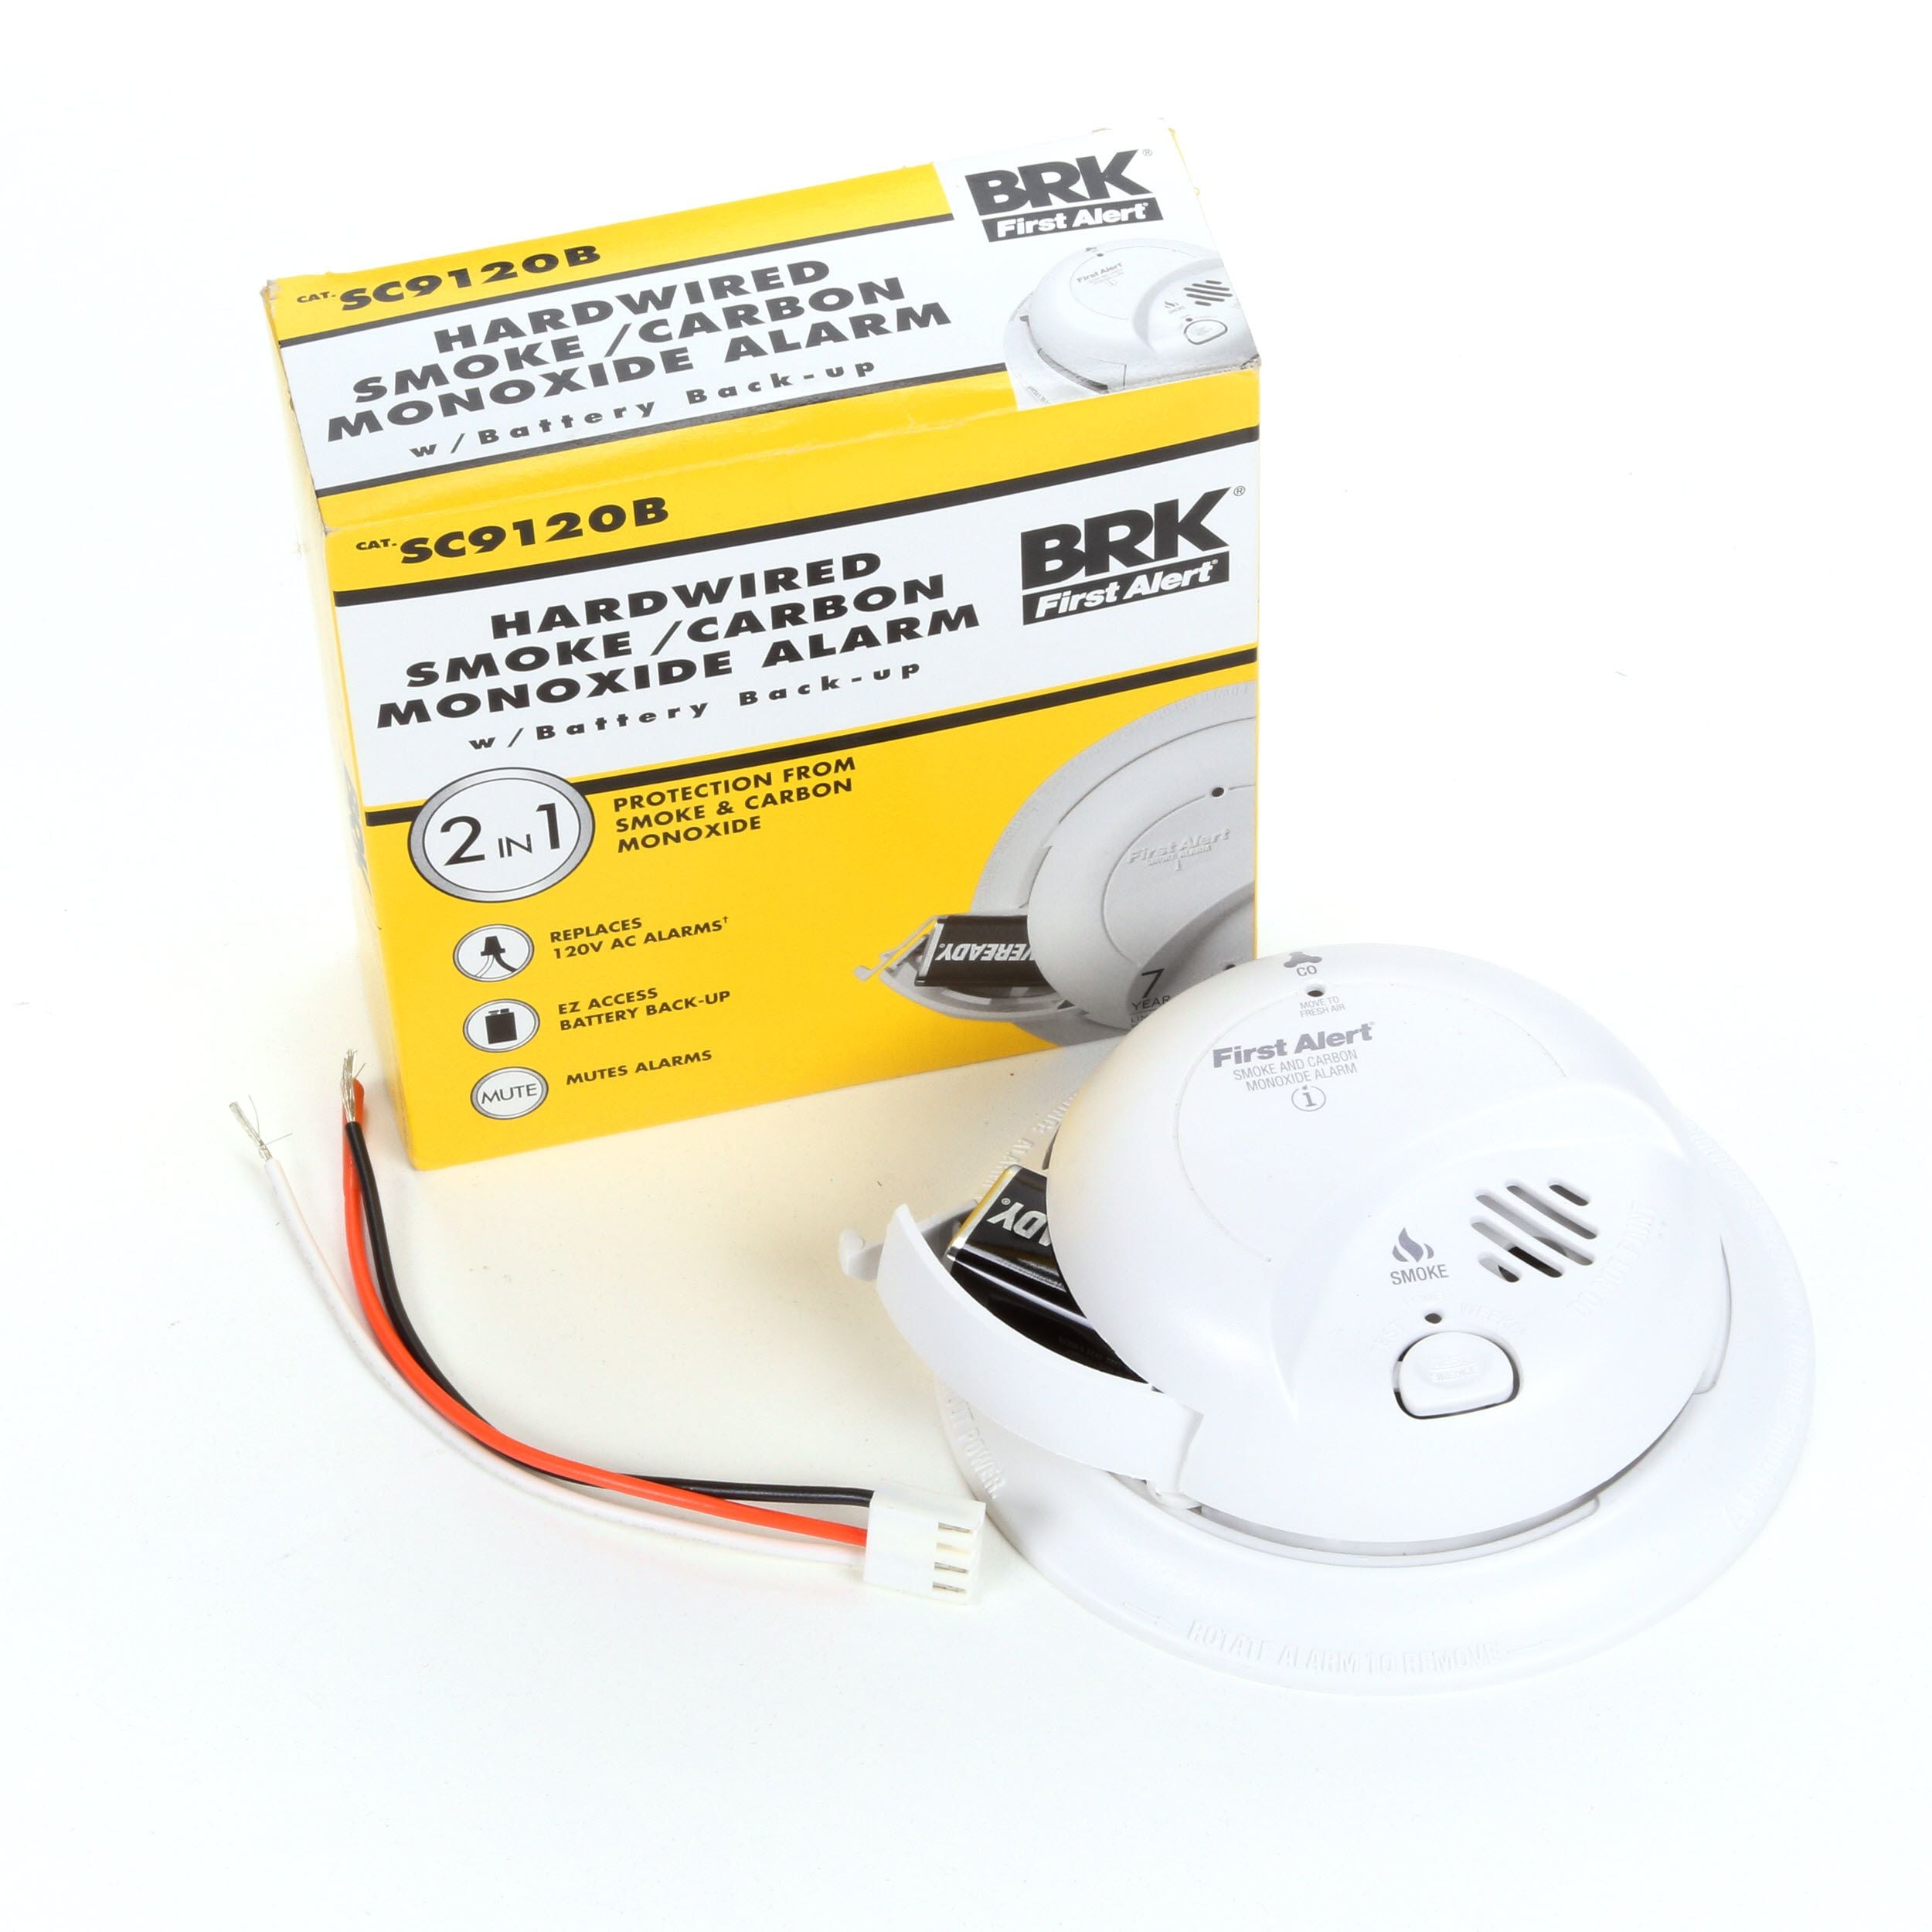 First Alert BRK SC9120B Hardwired Smoke and Carbon Monoxide Detector with B CO 